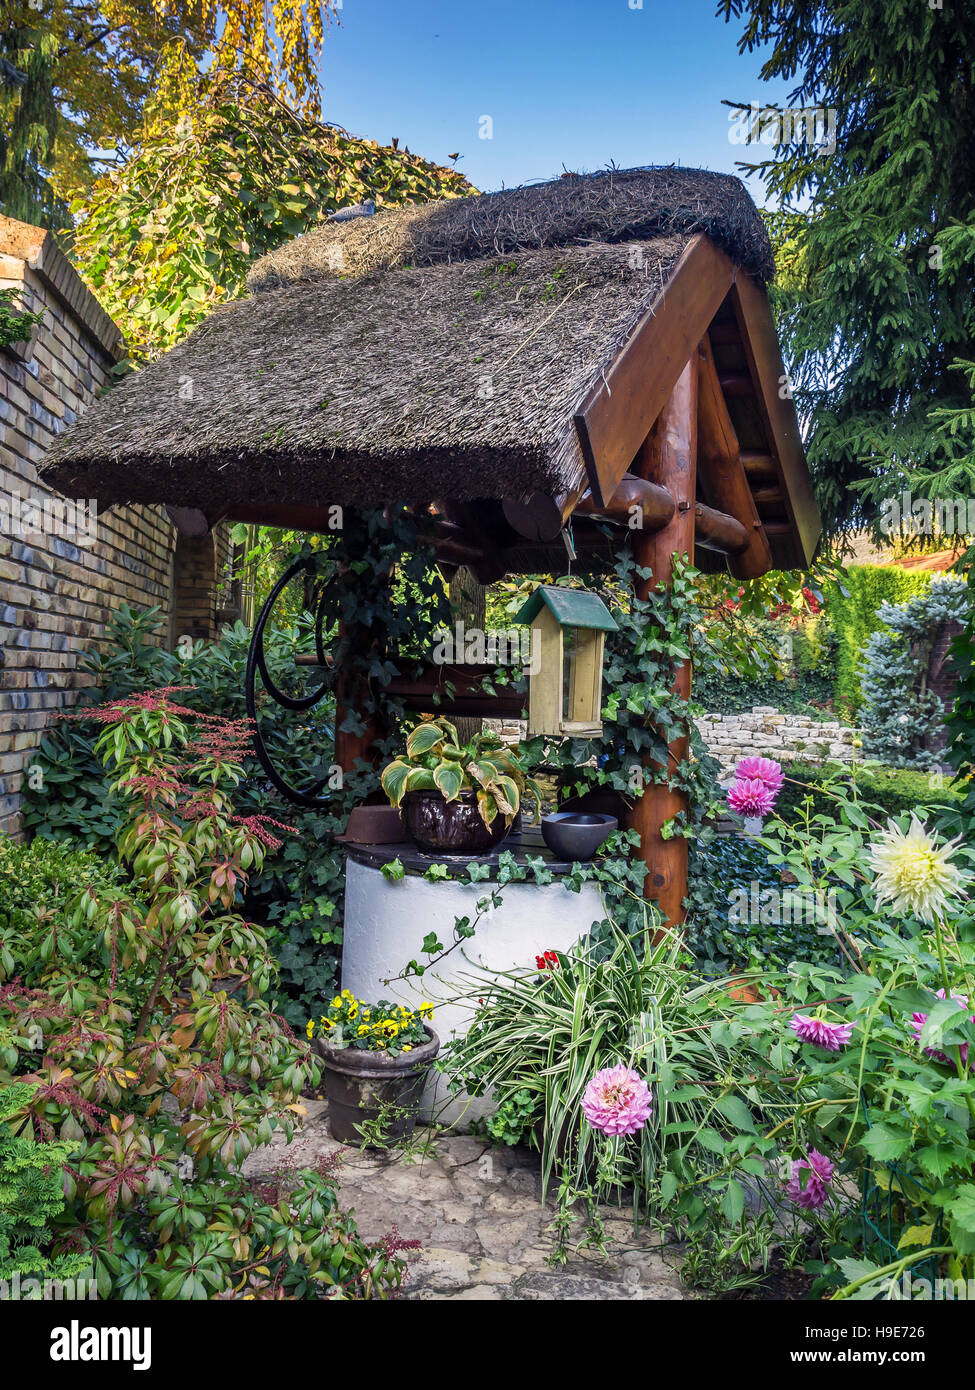 Old rustic thatched well in the garden surrounded by flowers and trees Stock Photo